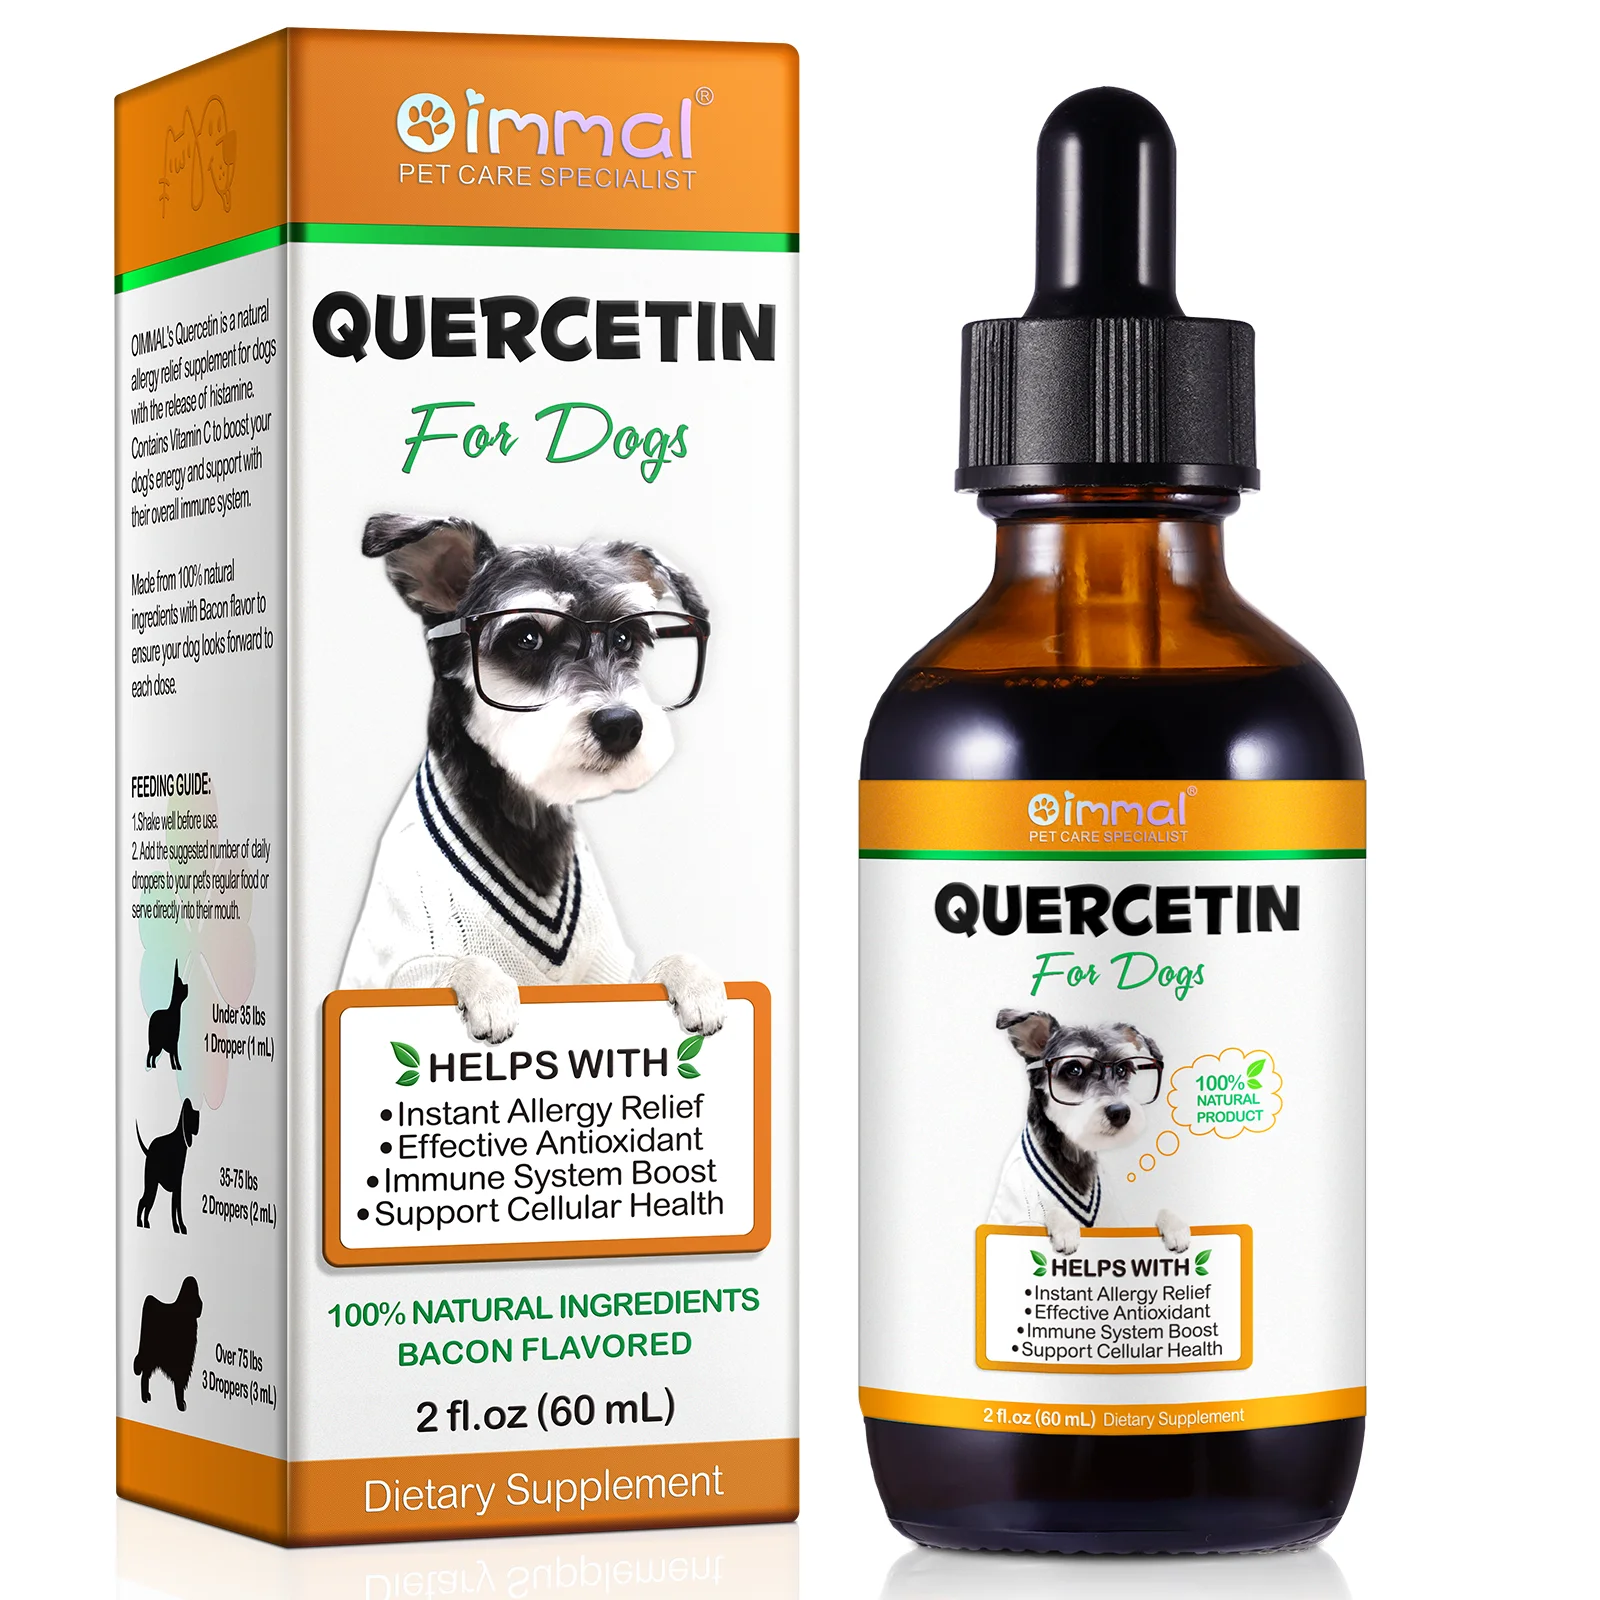 

60ml QUERCETIN FOR DOGS HELPS WITH Instant Allergy Relief Effective Antioxidant Immune System Boost for dogs